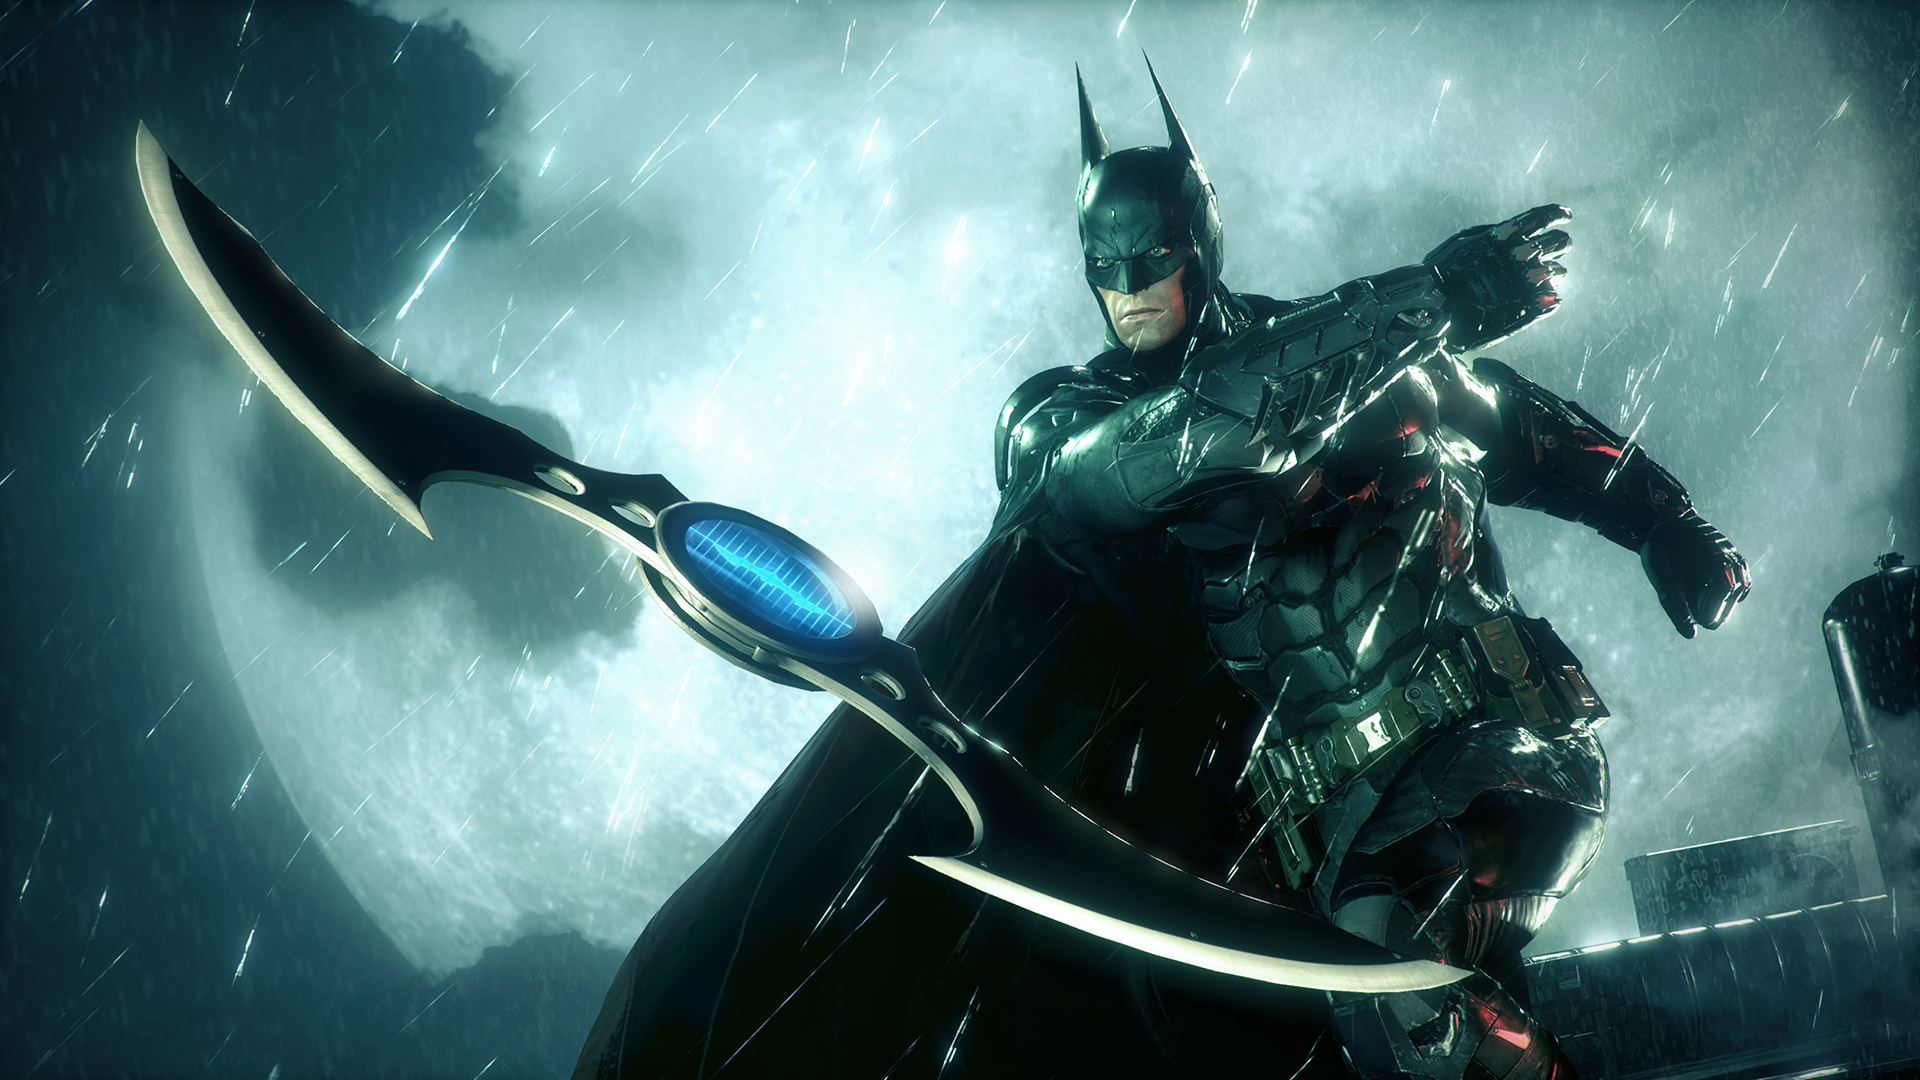 Remastered Batman Arkham Games Delayed. New Release Date Still to Be  Announced.